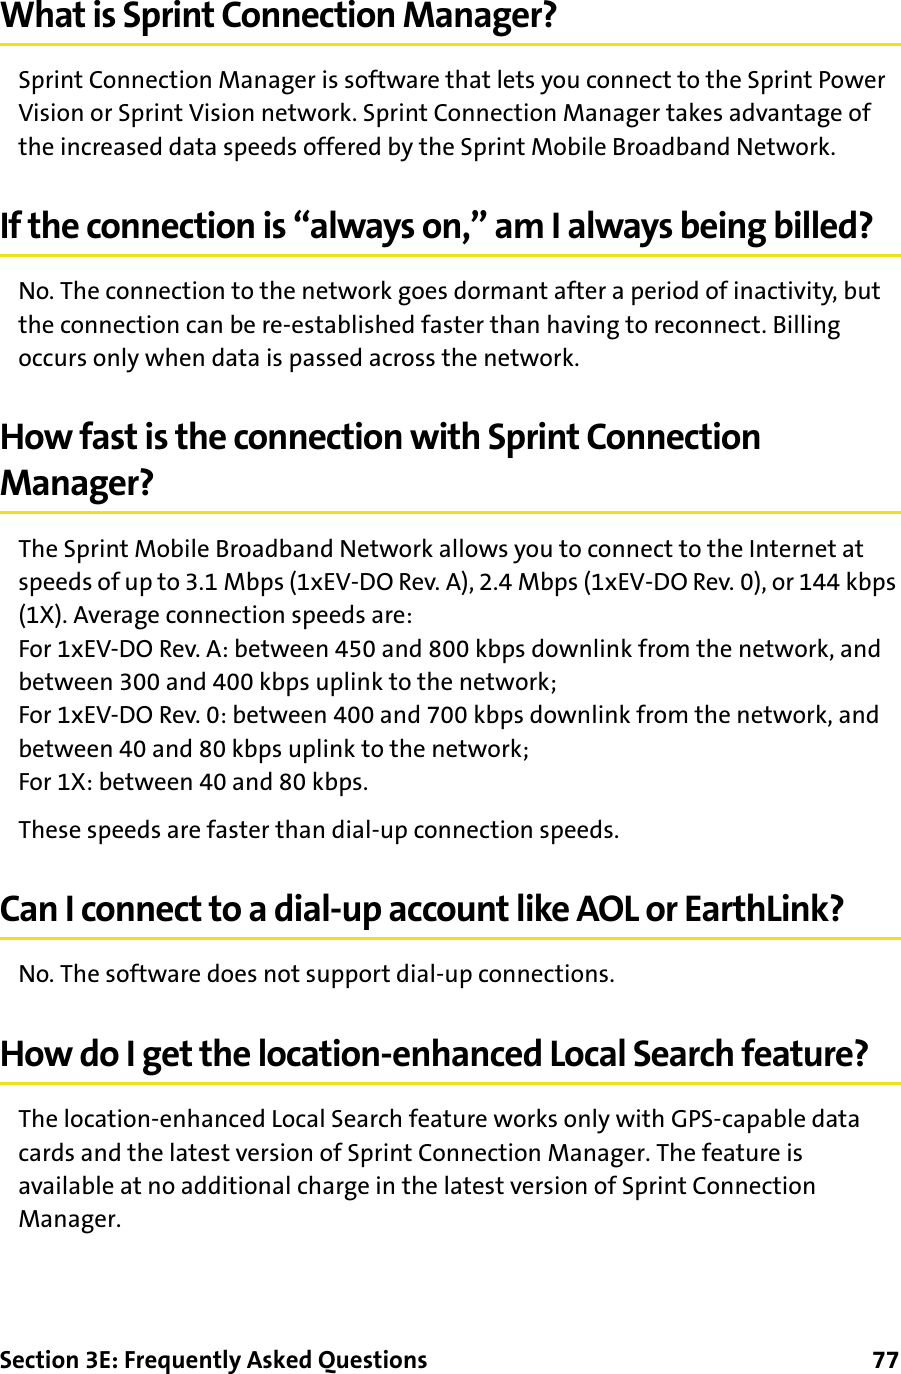 Section 3E: Frequently Asked Questions      77What is Sprint Connection Manager?Sprint Connection Manager is software that lets you connect to the Sprint Power Vision or Sprint Vision network. Sprint Connection Manager takes advantage of the increased data speeds offered by the Sprint Mobile Broadband Network.If the connection is “always on,” am I always being billed?No. The connection to the network goes dormant after a period of inactivity, but the connection can be re-established faster than having to reconnect. Billing occurs only when data is passed across the network.How fast is the connection with Sprint Connection Manager?The Sprint Mobile Broadband Network allows you to connect to the Internet at speeds of up to 3.1 Mbps (1xEV-DO Rev. A), 2.4 Mbps (1xEV-DO Rev. 0), or 144 kbps (1X). Average connection speeds are:For 1xEV-DO Rev. A: between 450 and 800 kbps downlink from the network, and between 300 and 400 kbps uplink to the network;For 1xEV-DO Rev. 0: between 400 and 700 kbps downlink from the network, and between 40 and 80 kbps uplink to the network;For 1X: between 40 and 80 kbps.These speeds are faster than dial-up connection speeds.Can I connect to a dial-up account like AOL or EarthLink?No. The software does not support dial-up connections.How do I get the location-enhanced Local Search feature?The location-enhanced Local Search feature works only with GPS-capable data cards and the latest version of Sprint Connection Manager. The feature is available at no additional charge in the latest version of Sprint Connection Manager.